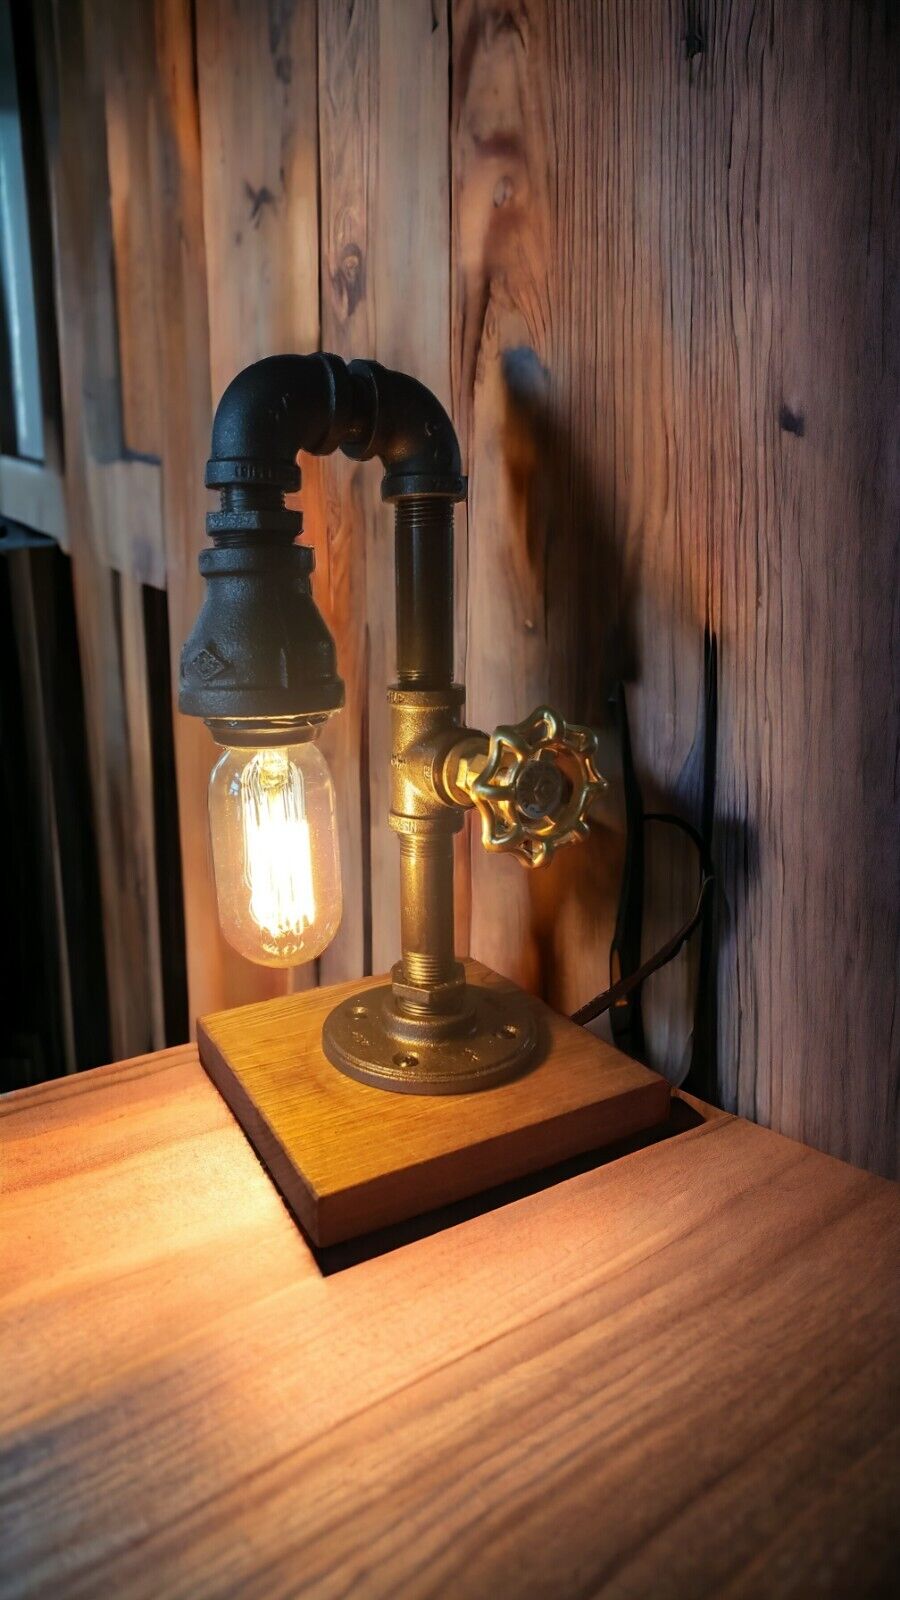 Handcrafted Retro Industrial Pipe desk lamp with valve on/off switch